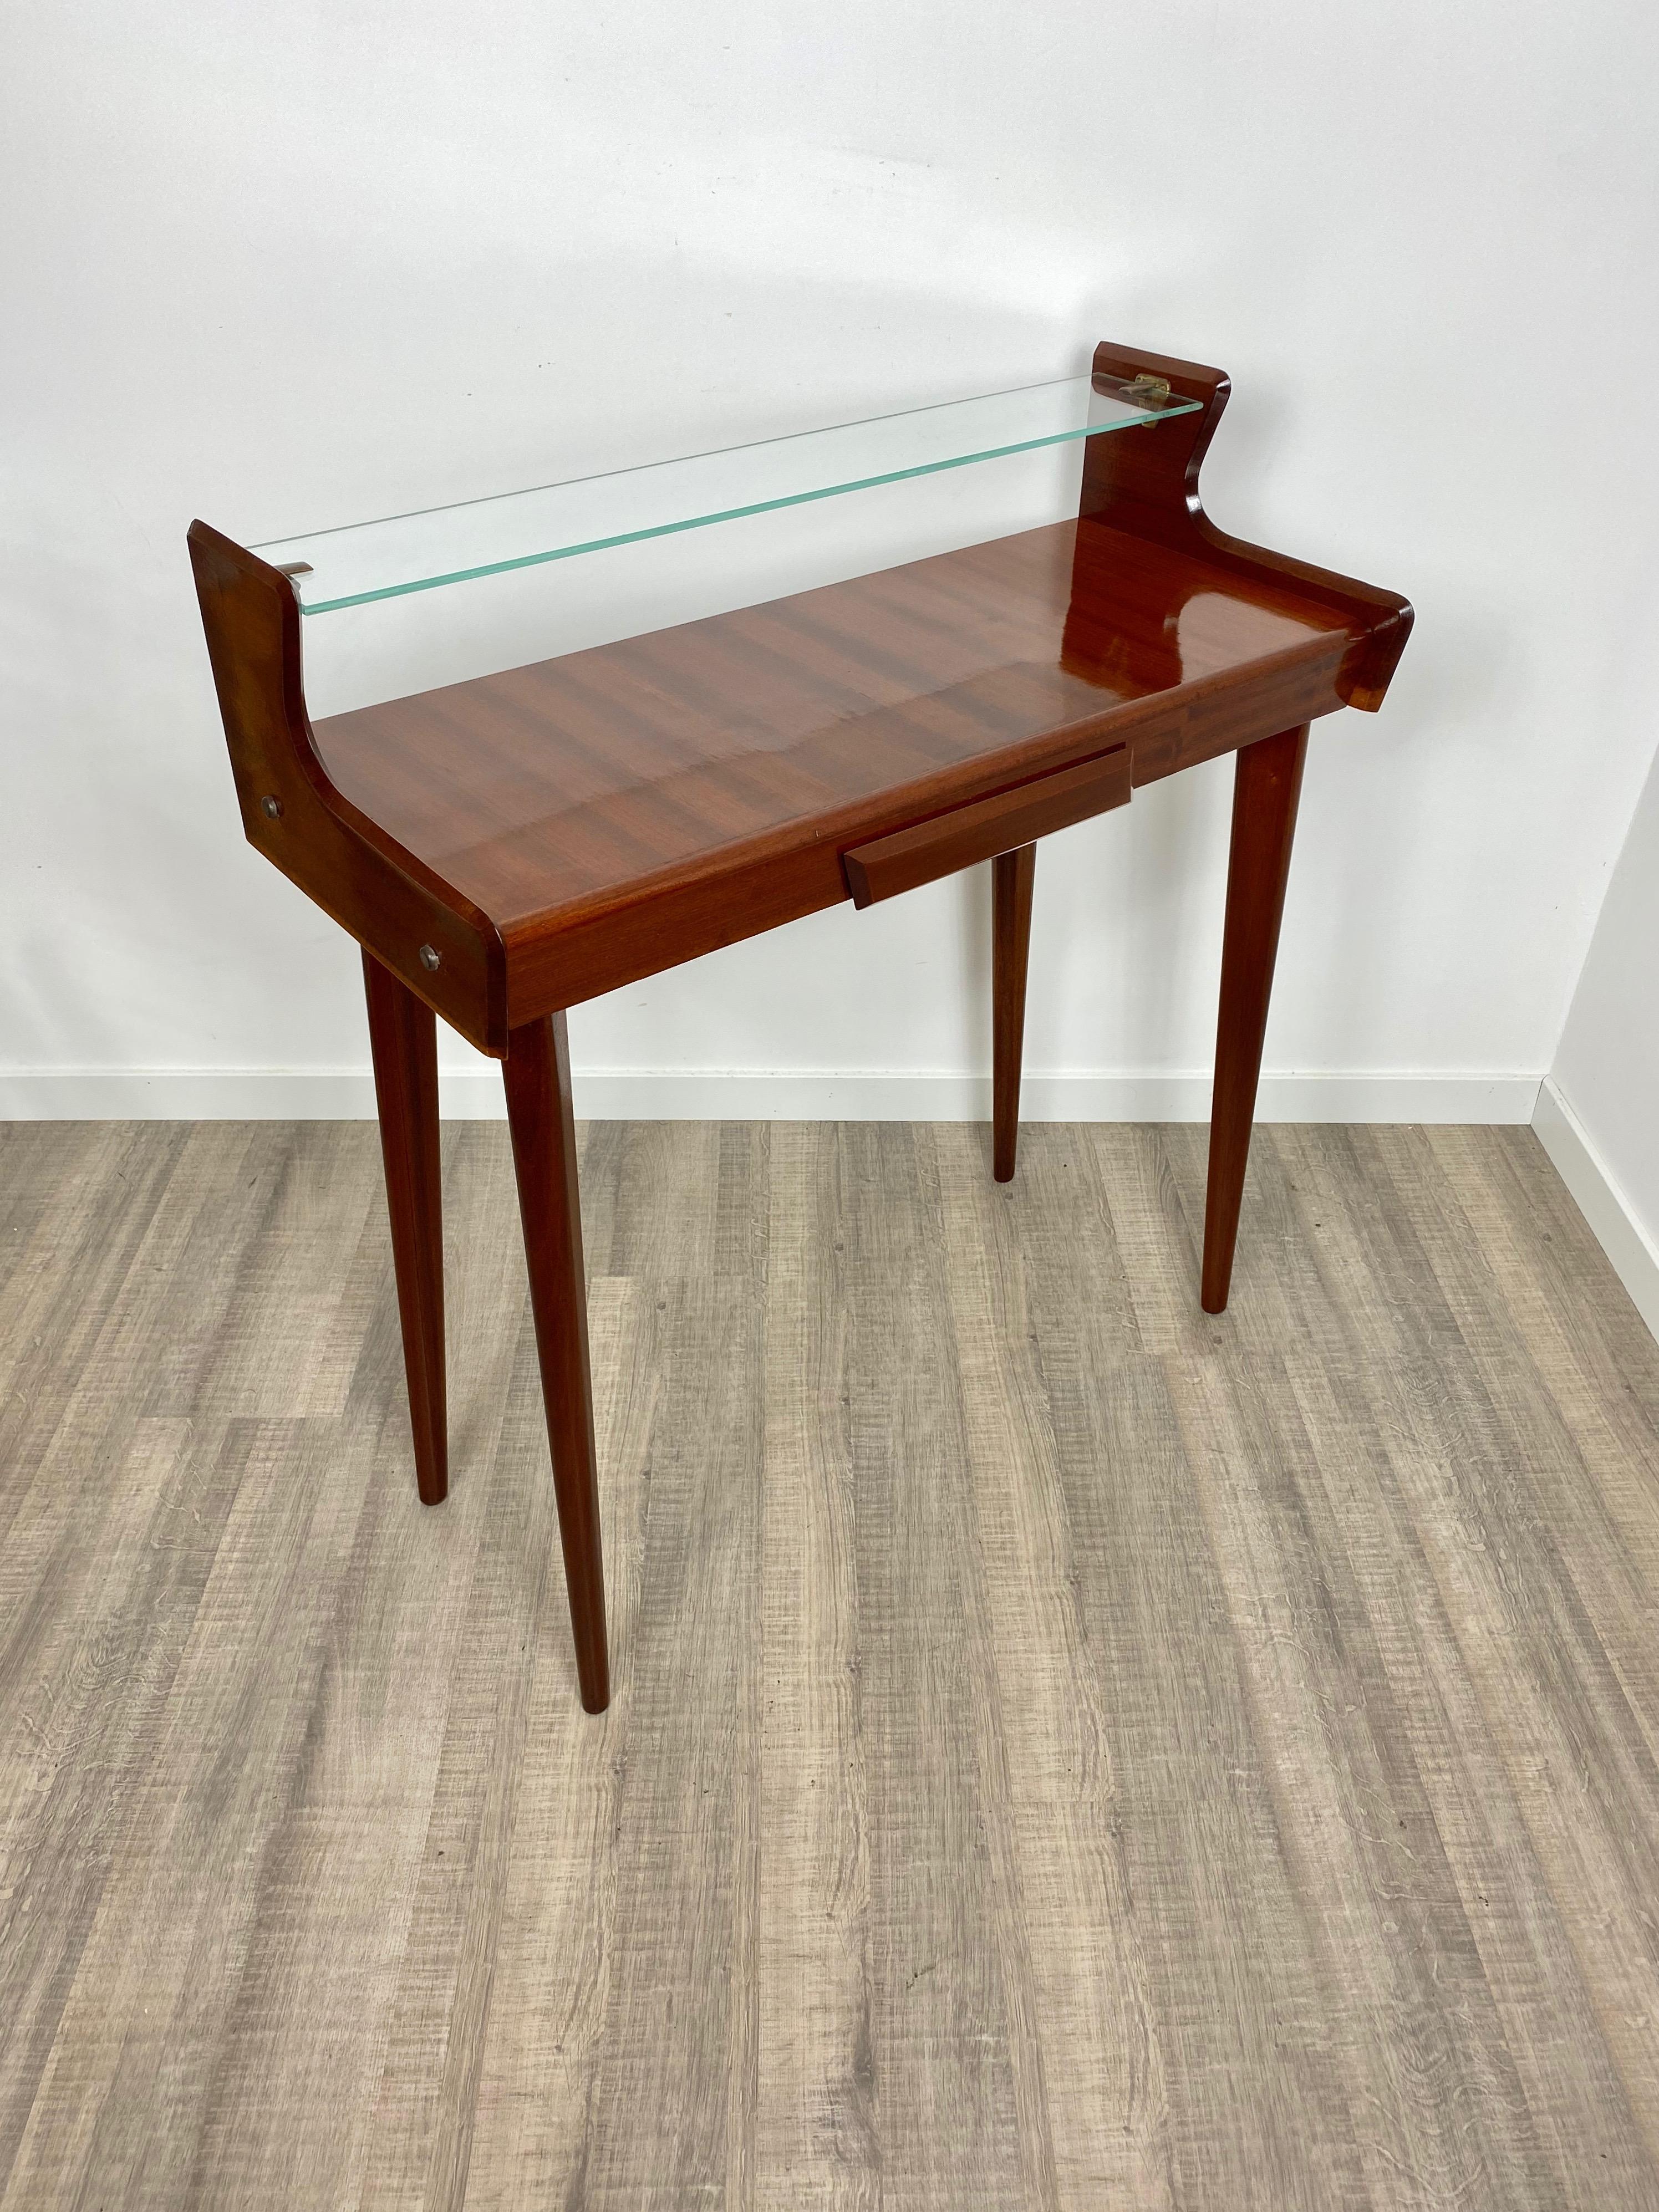 A splendid example of linear style typical of Italian design in the 1950s and 1960s.
Mahogany console in excellent condition, suitable for any environment; essential and elegant in its simplicity.